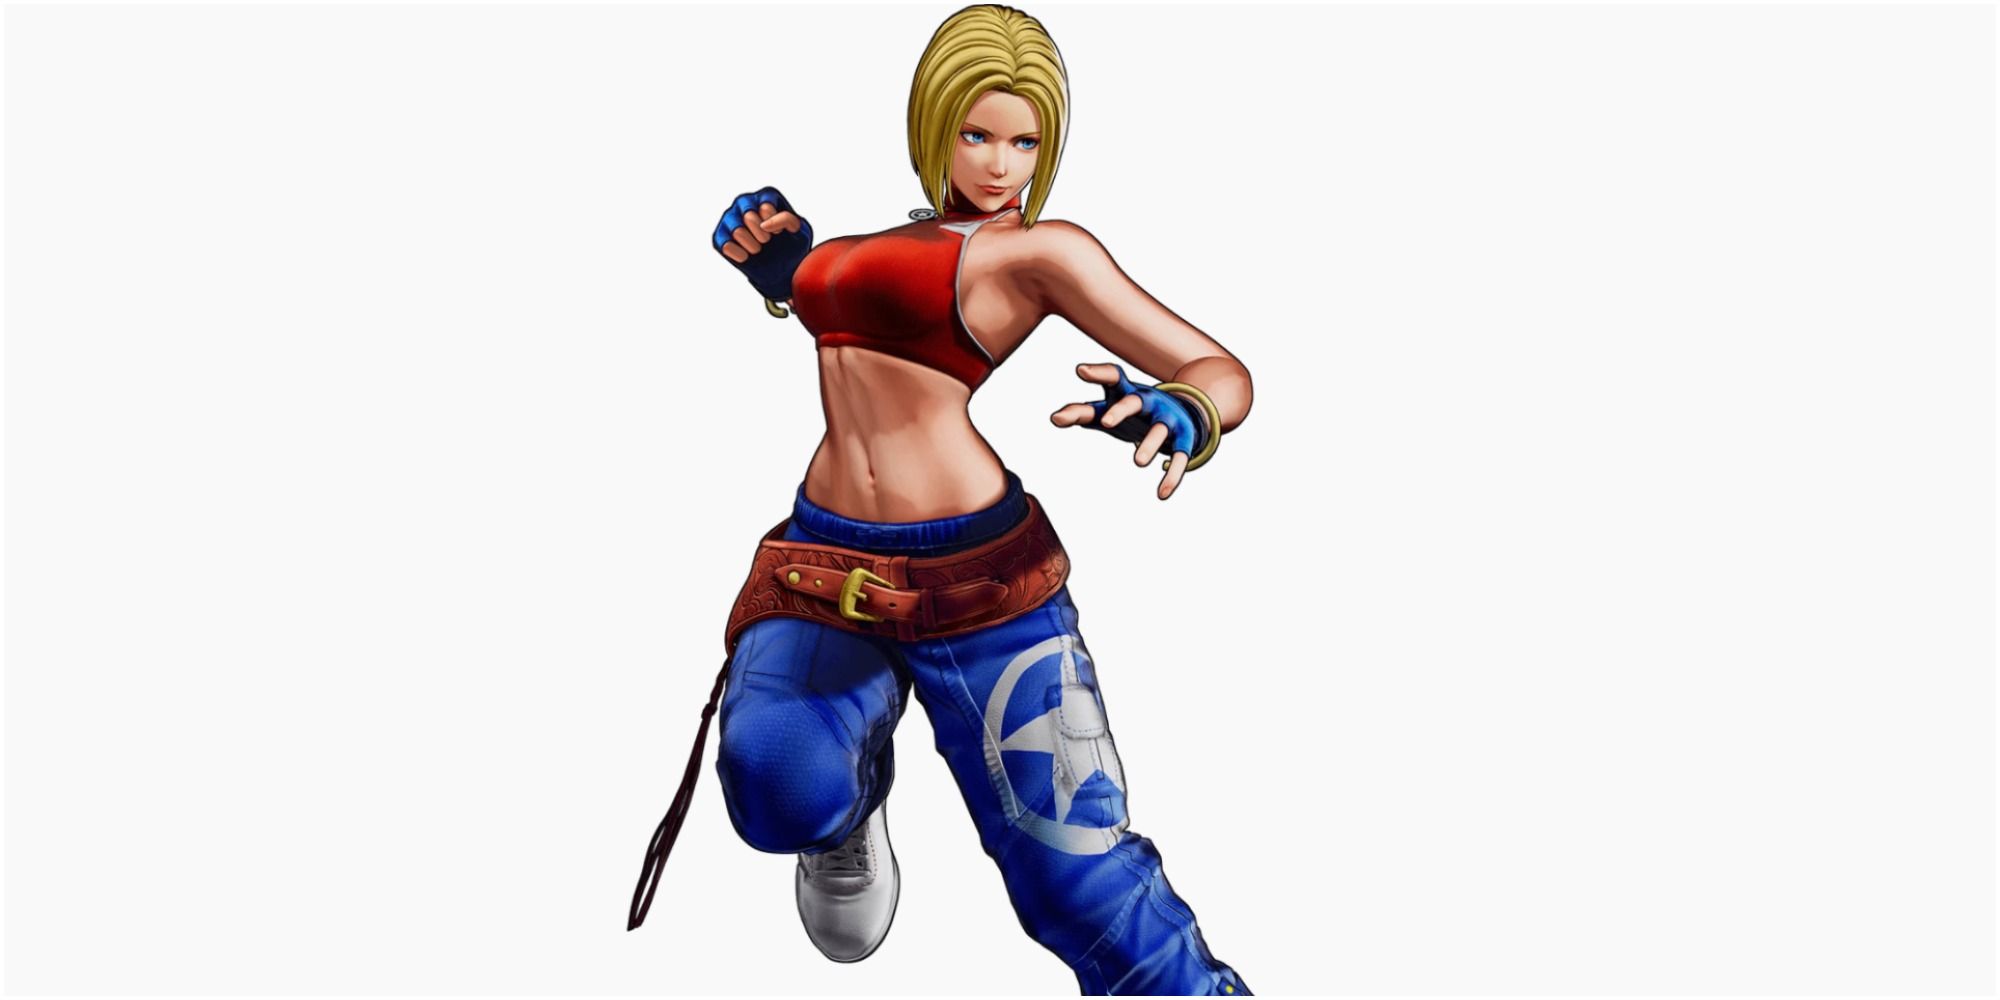 Blue Mary from the King Of Fighters series